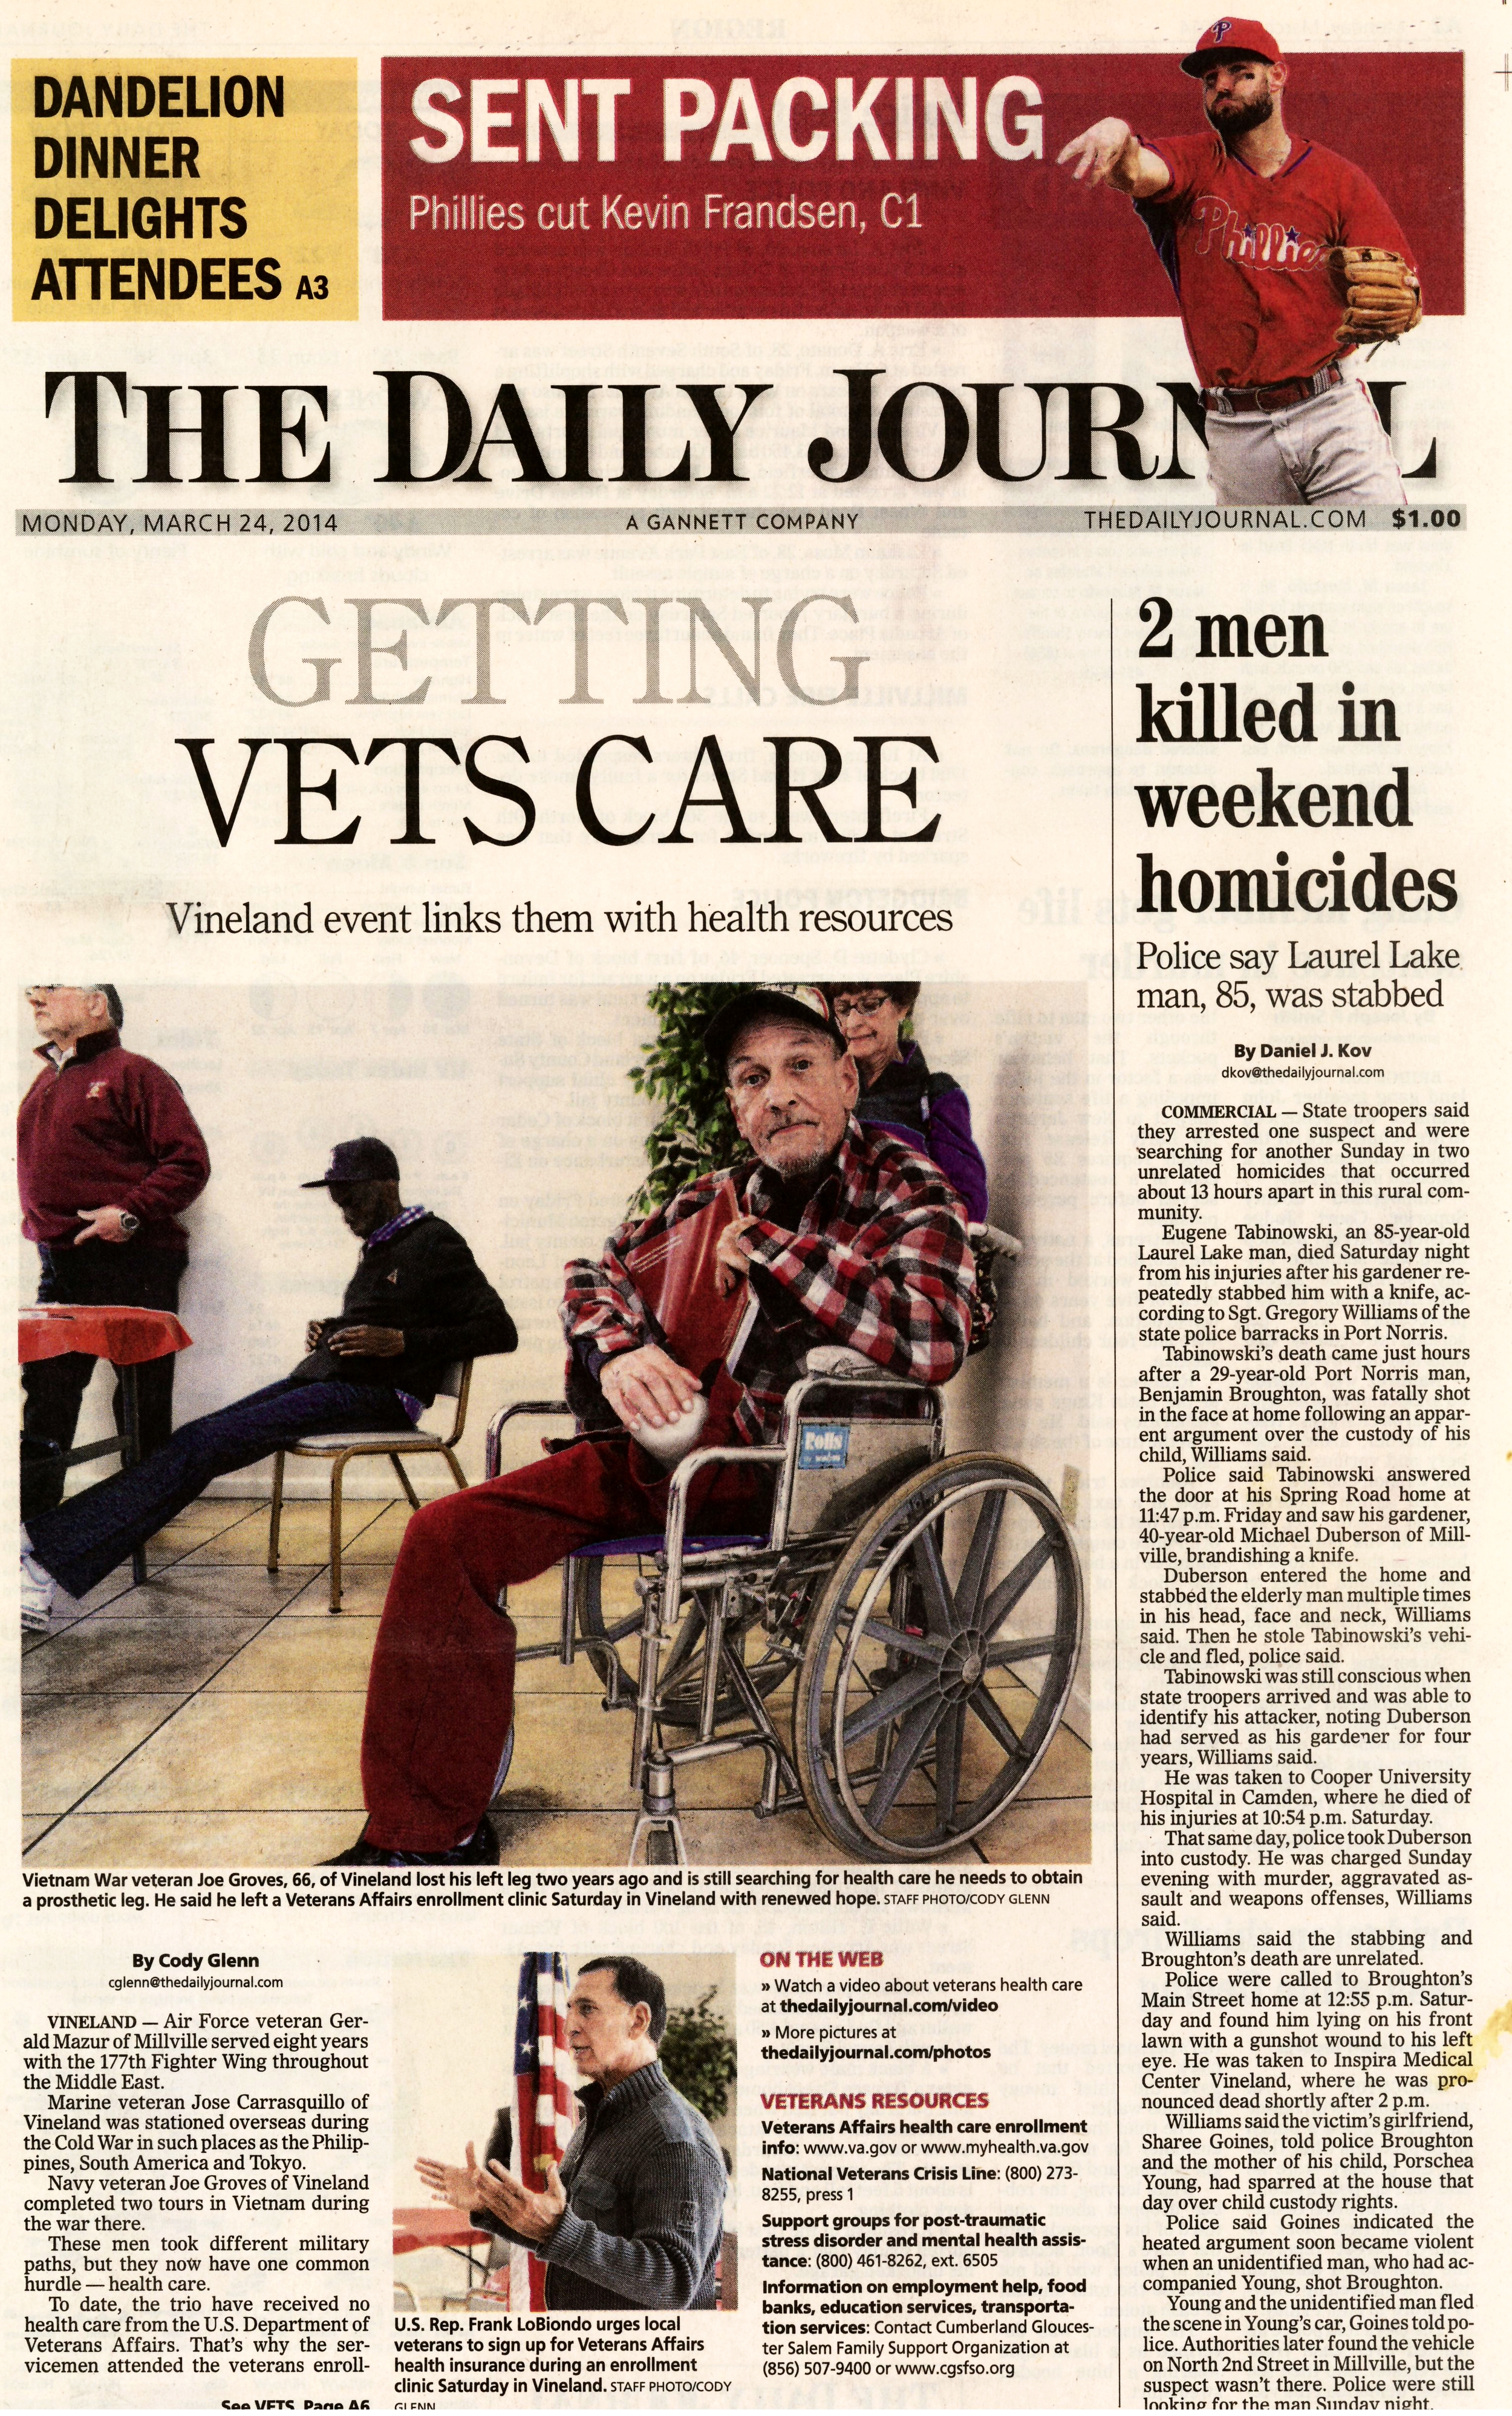  Military veterans health event in Vineland,&nbsp;New Jersey March 24, 2014 /  The Daily Journal  